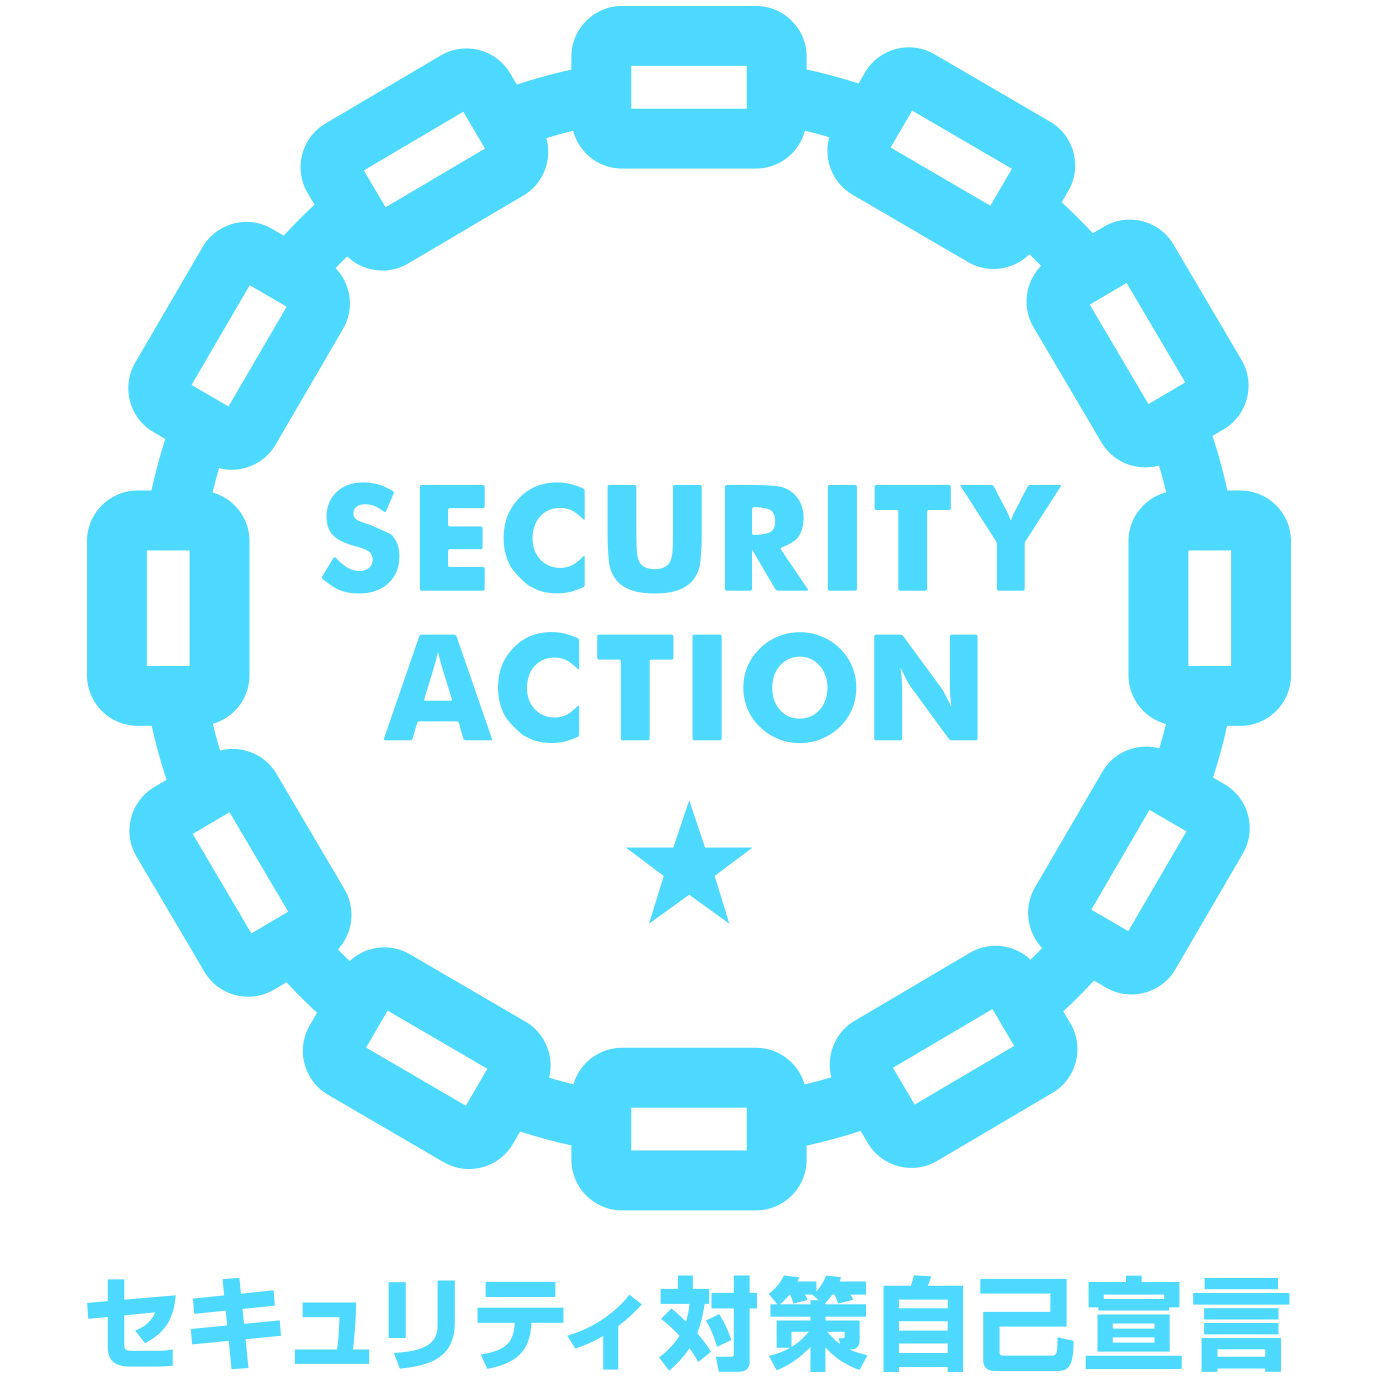 「SECURITY ACTION（一つ星）」を宣言しました